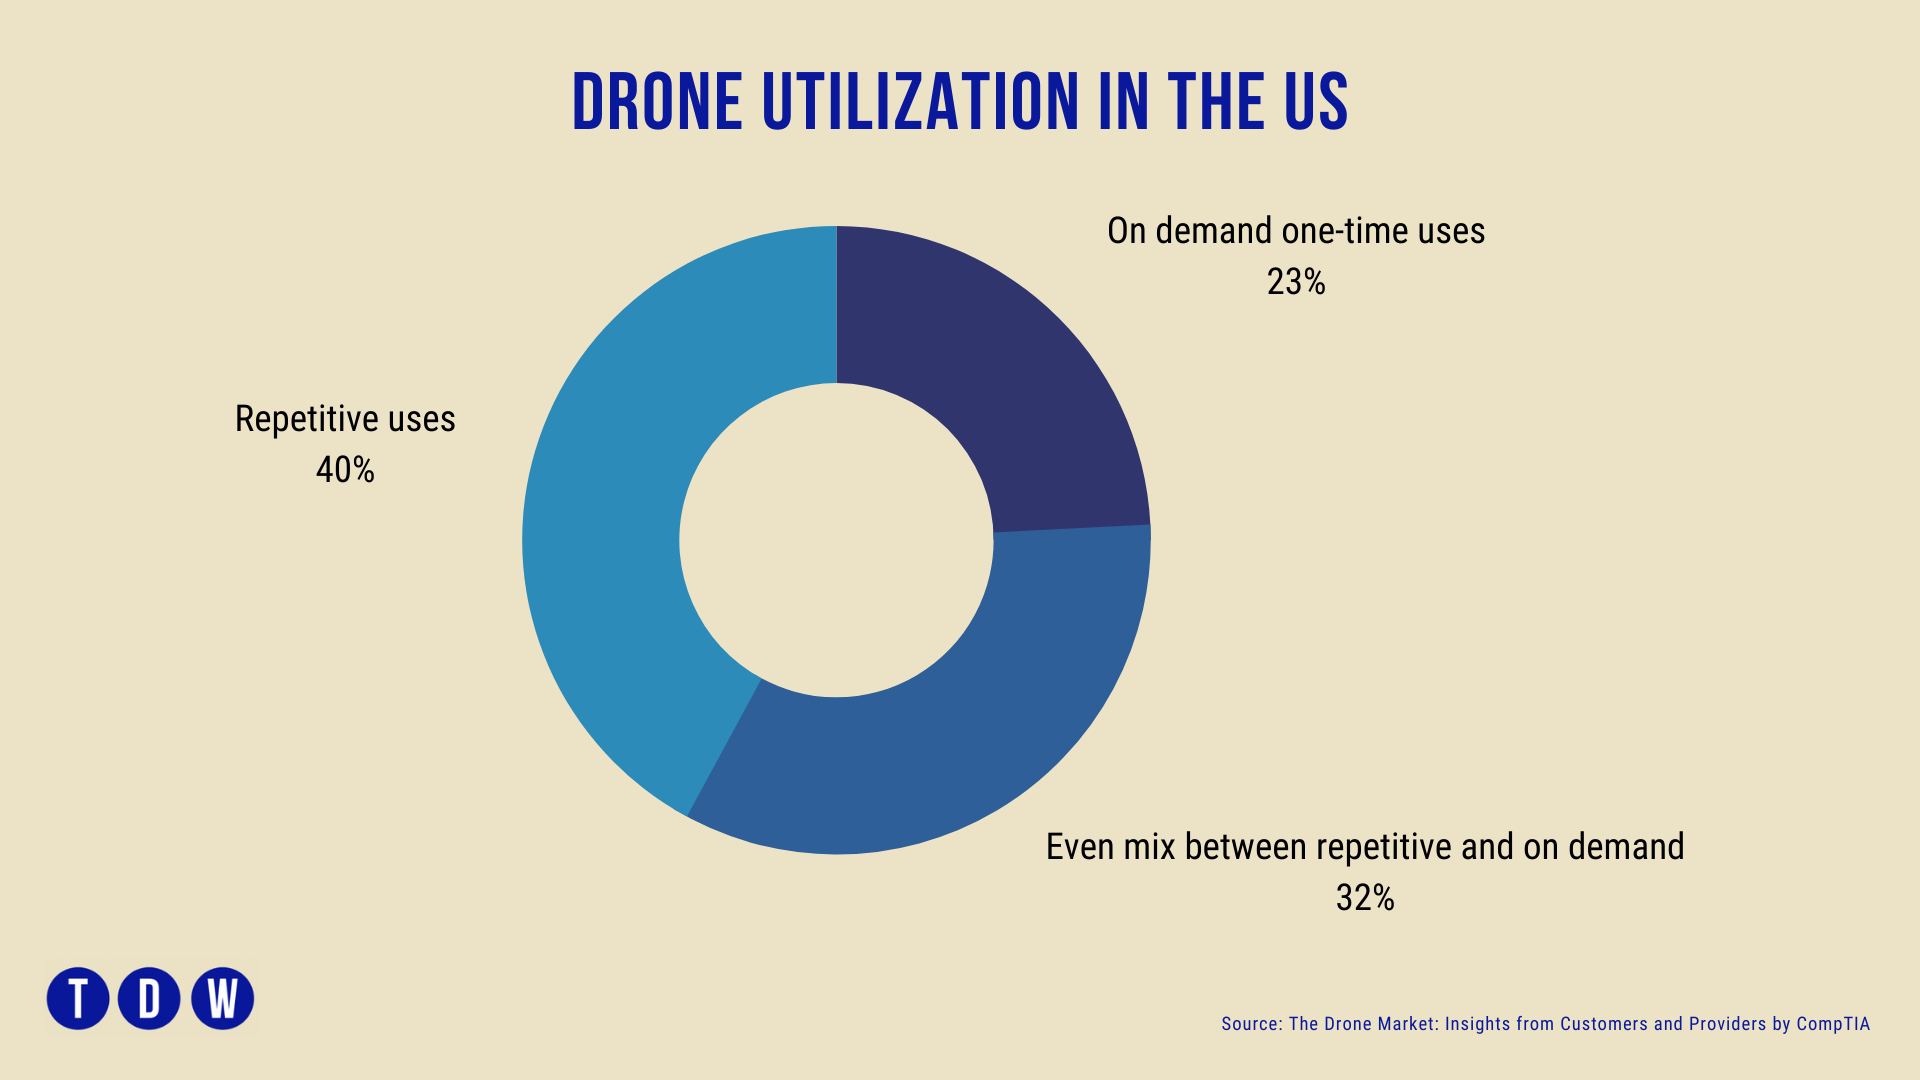 drone industry in the US